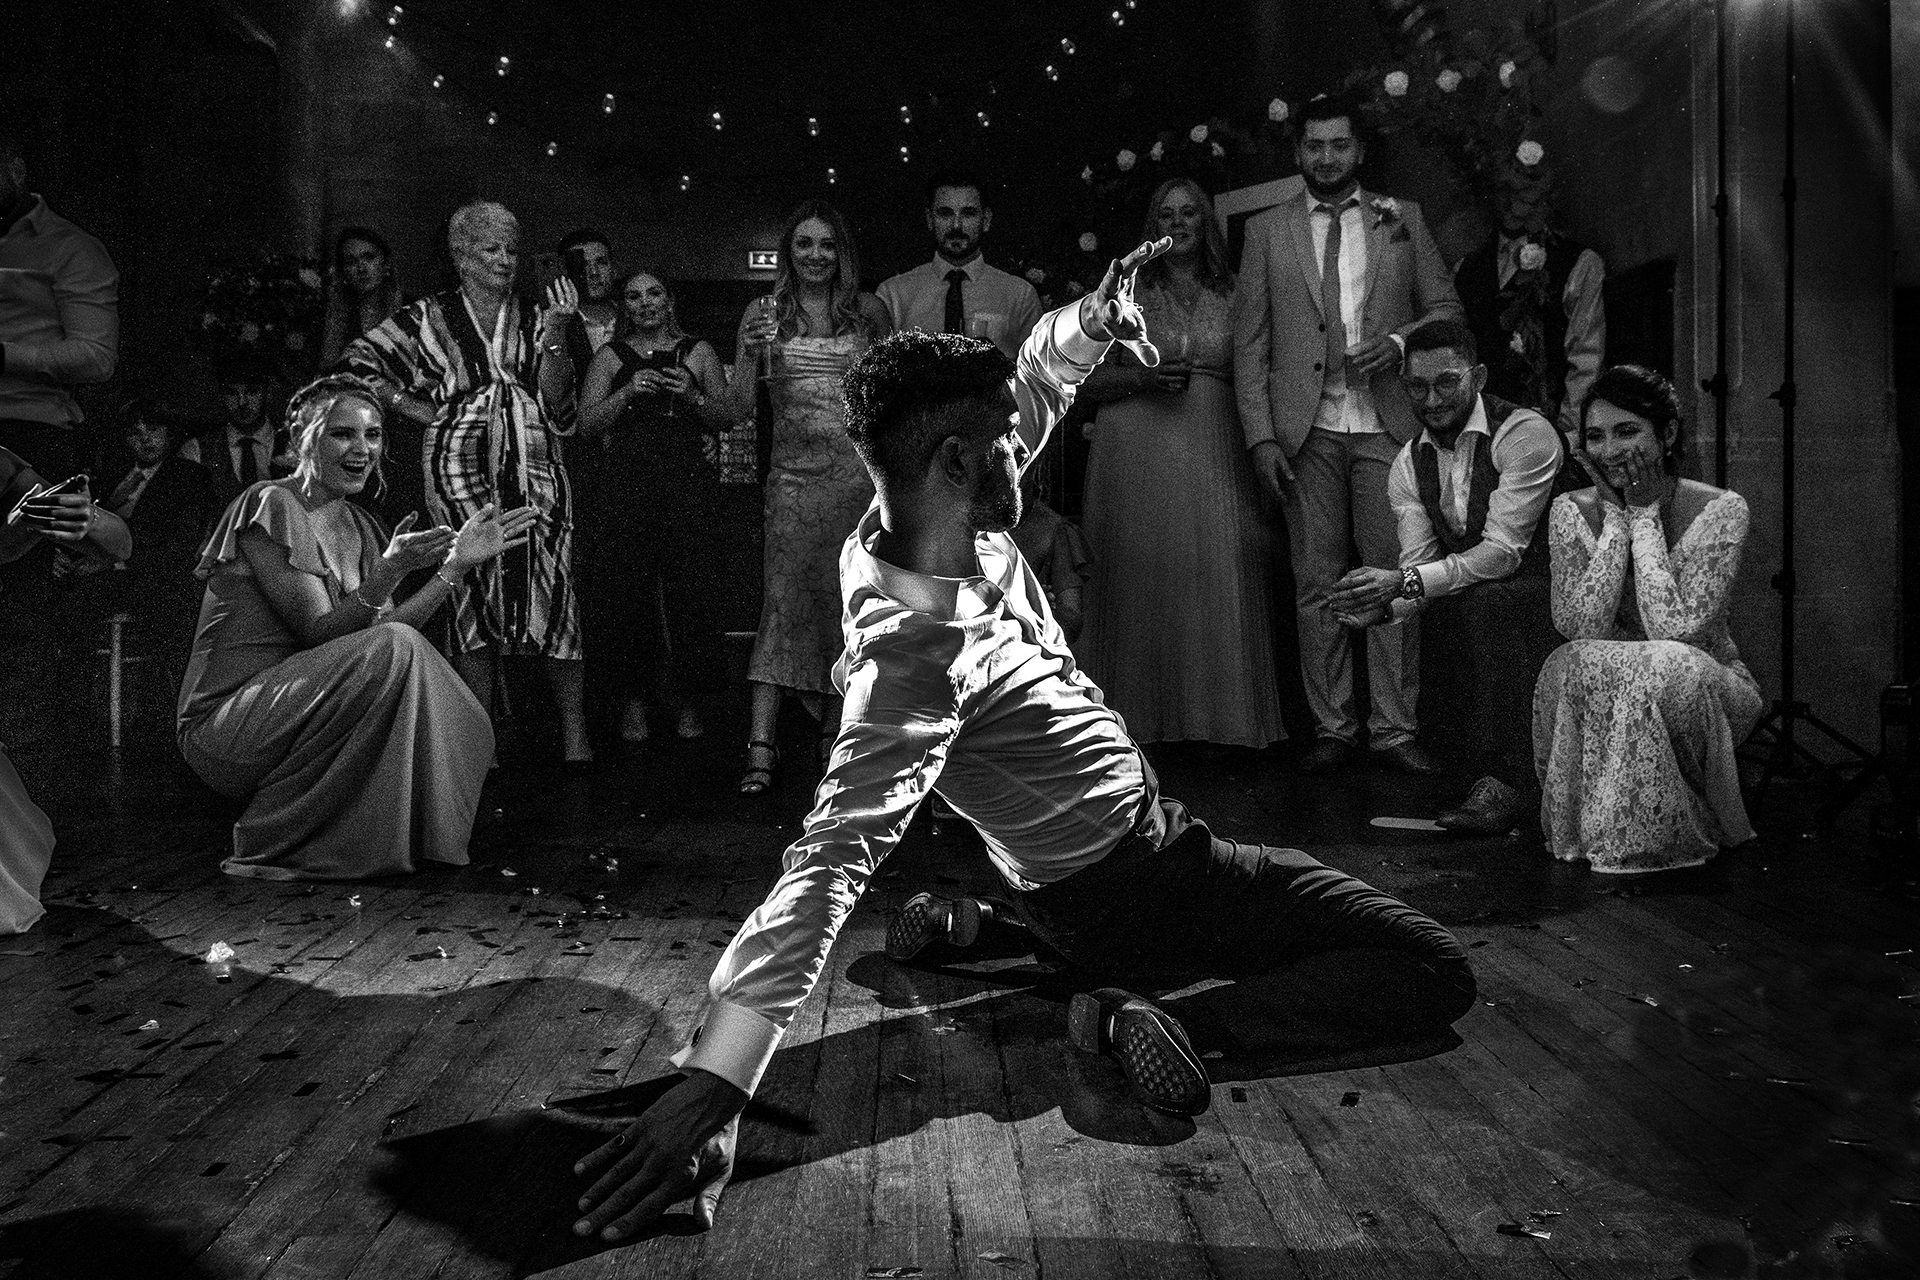 Groom dancing on the dance floor while bride and guests watch